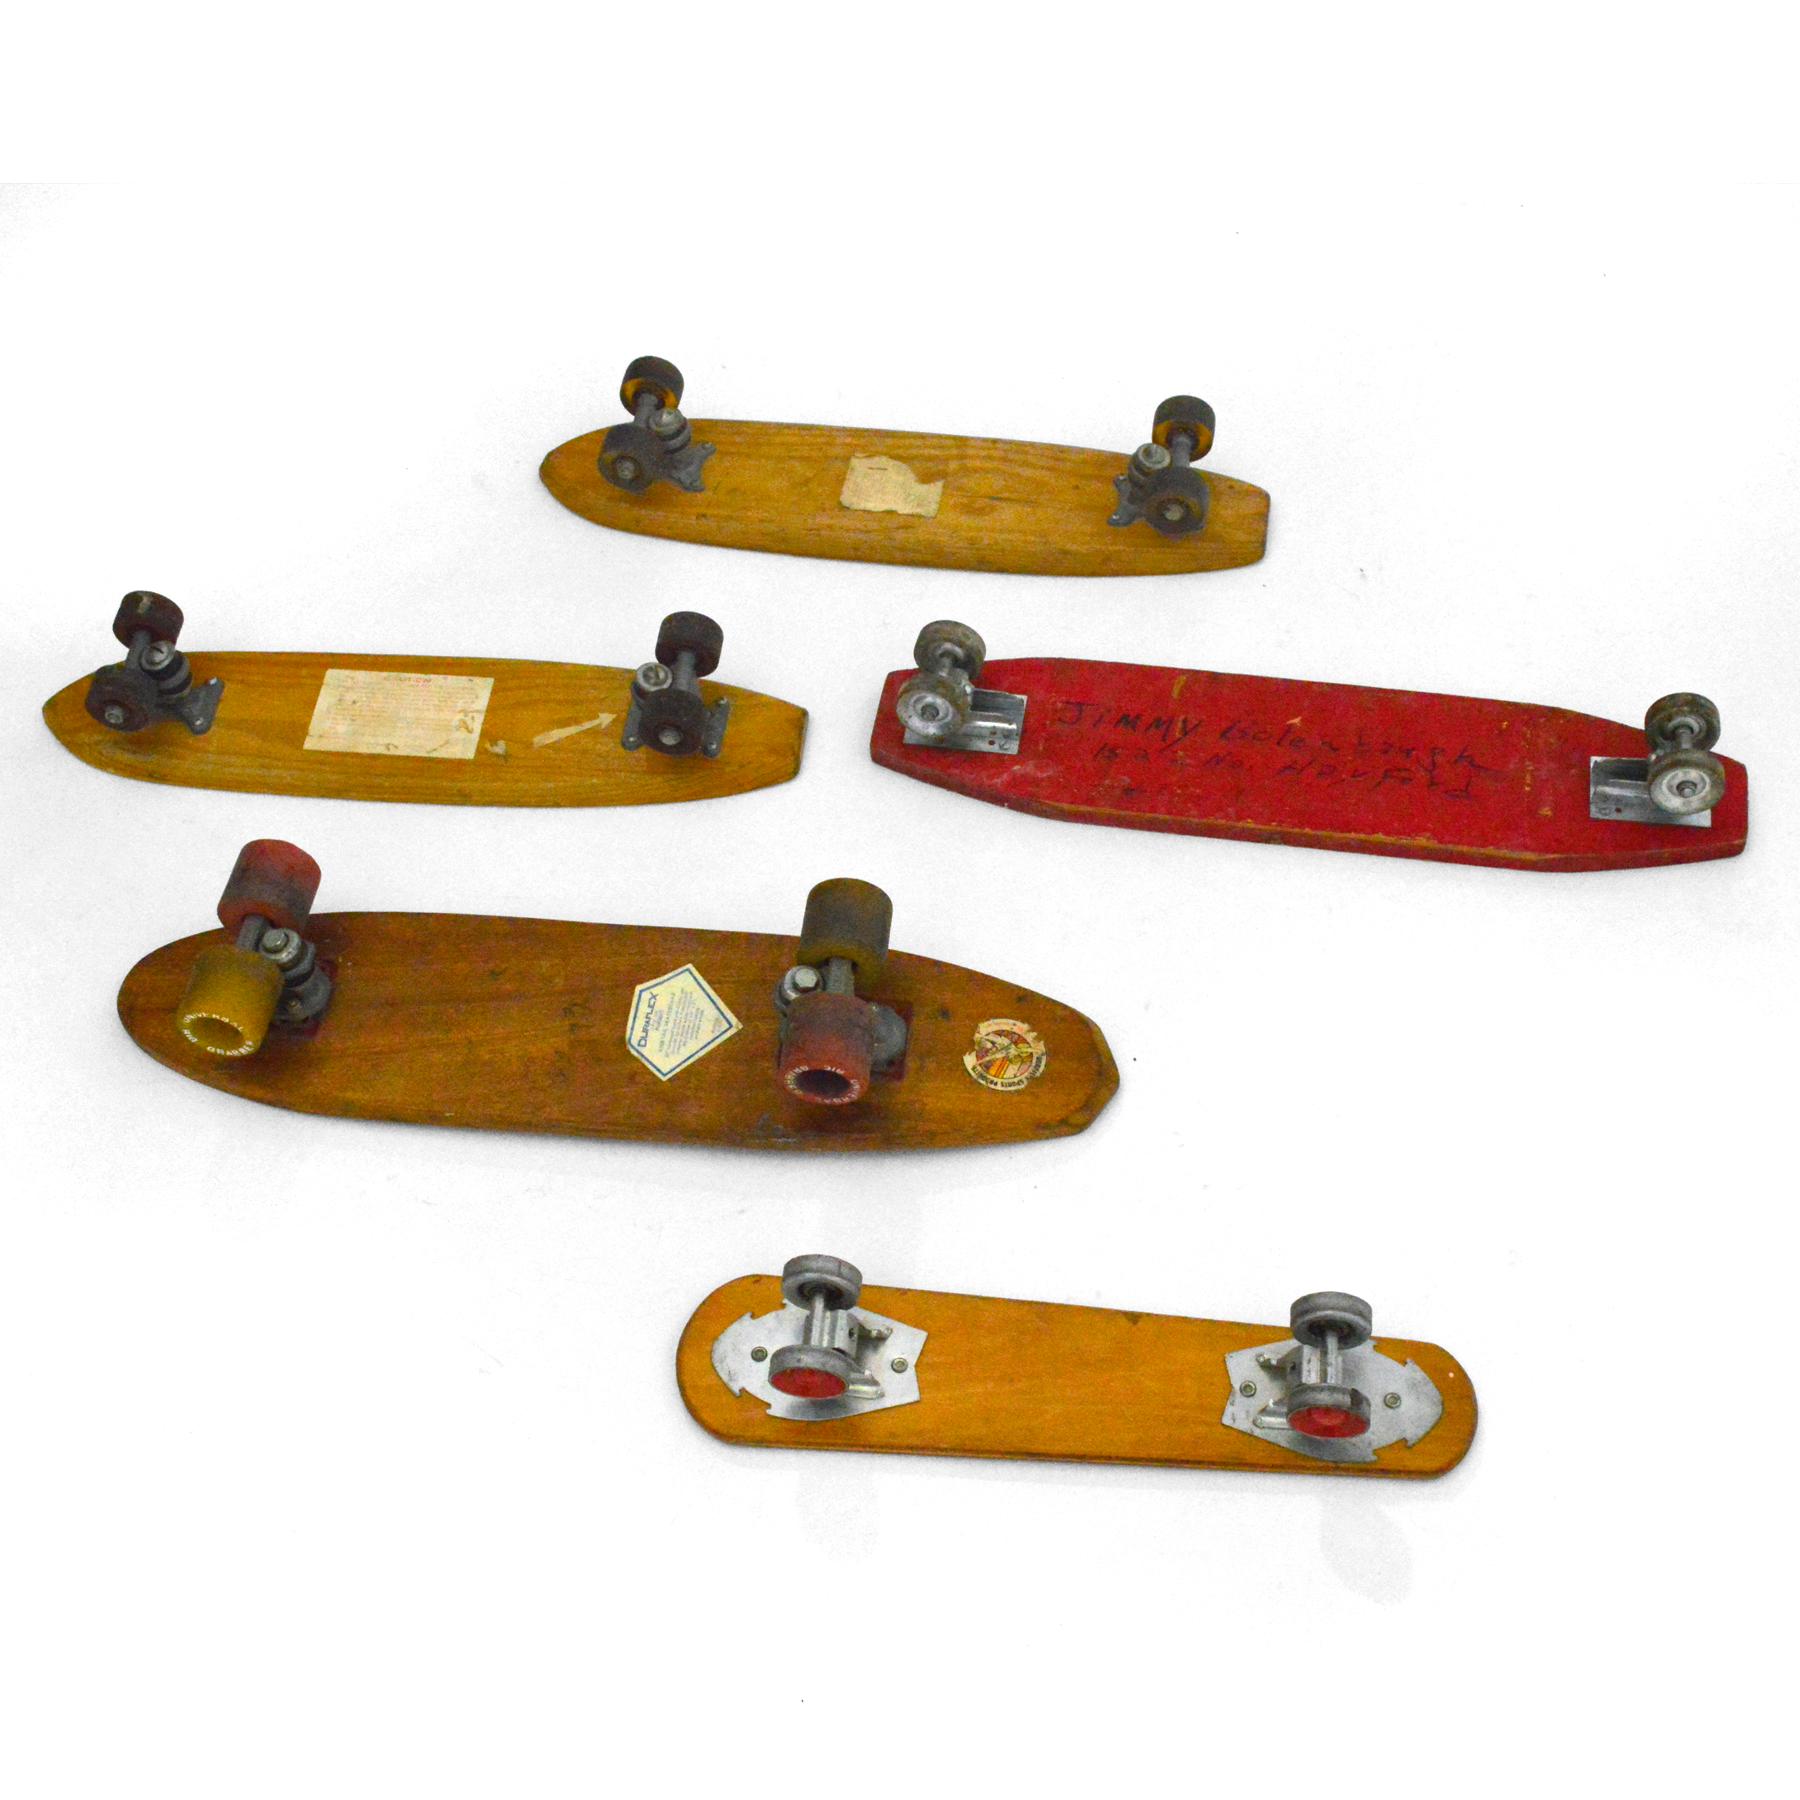 Mid-Century Modern Collection of Vintage Skateboards